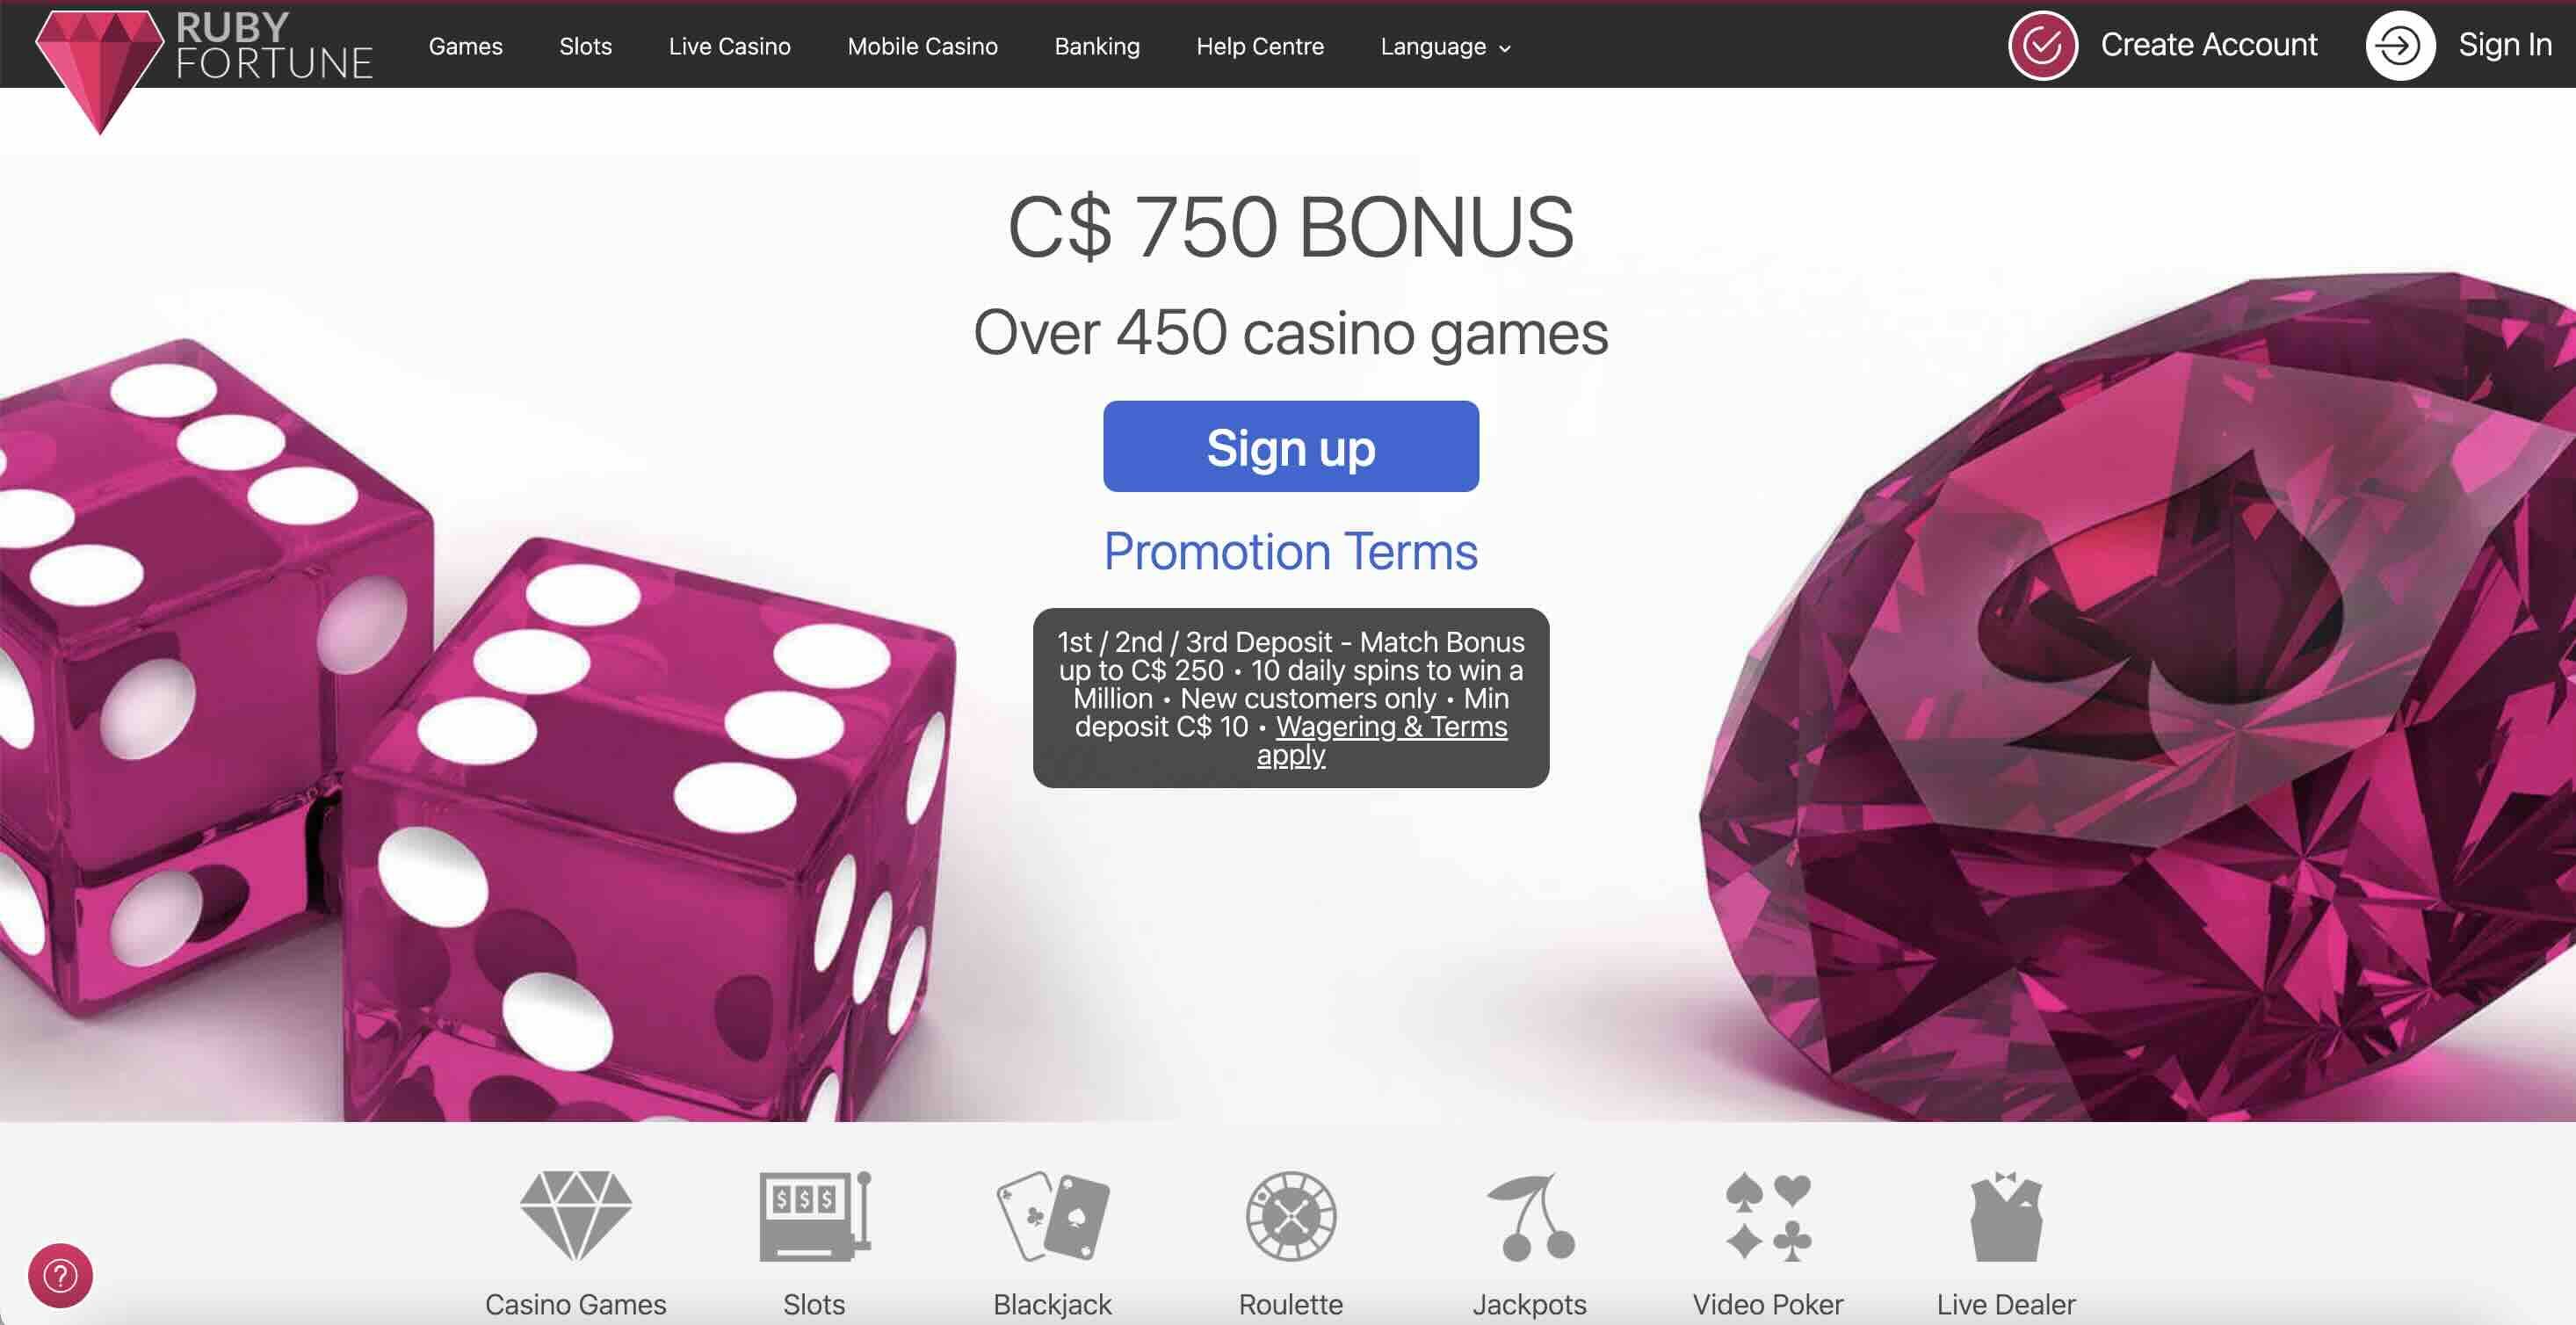 Image of main page of Ruby Fortune Casino